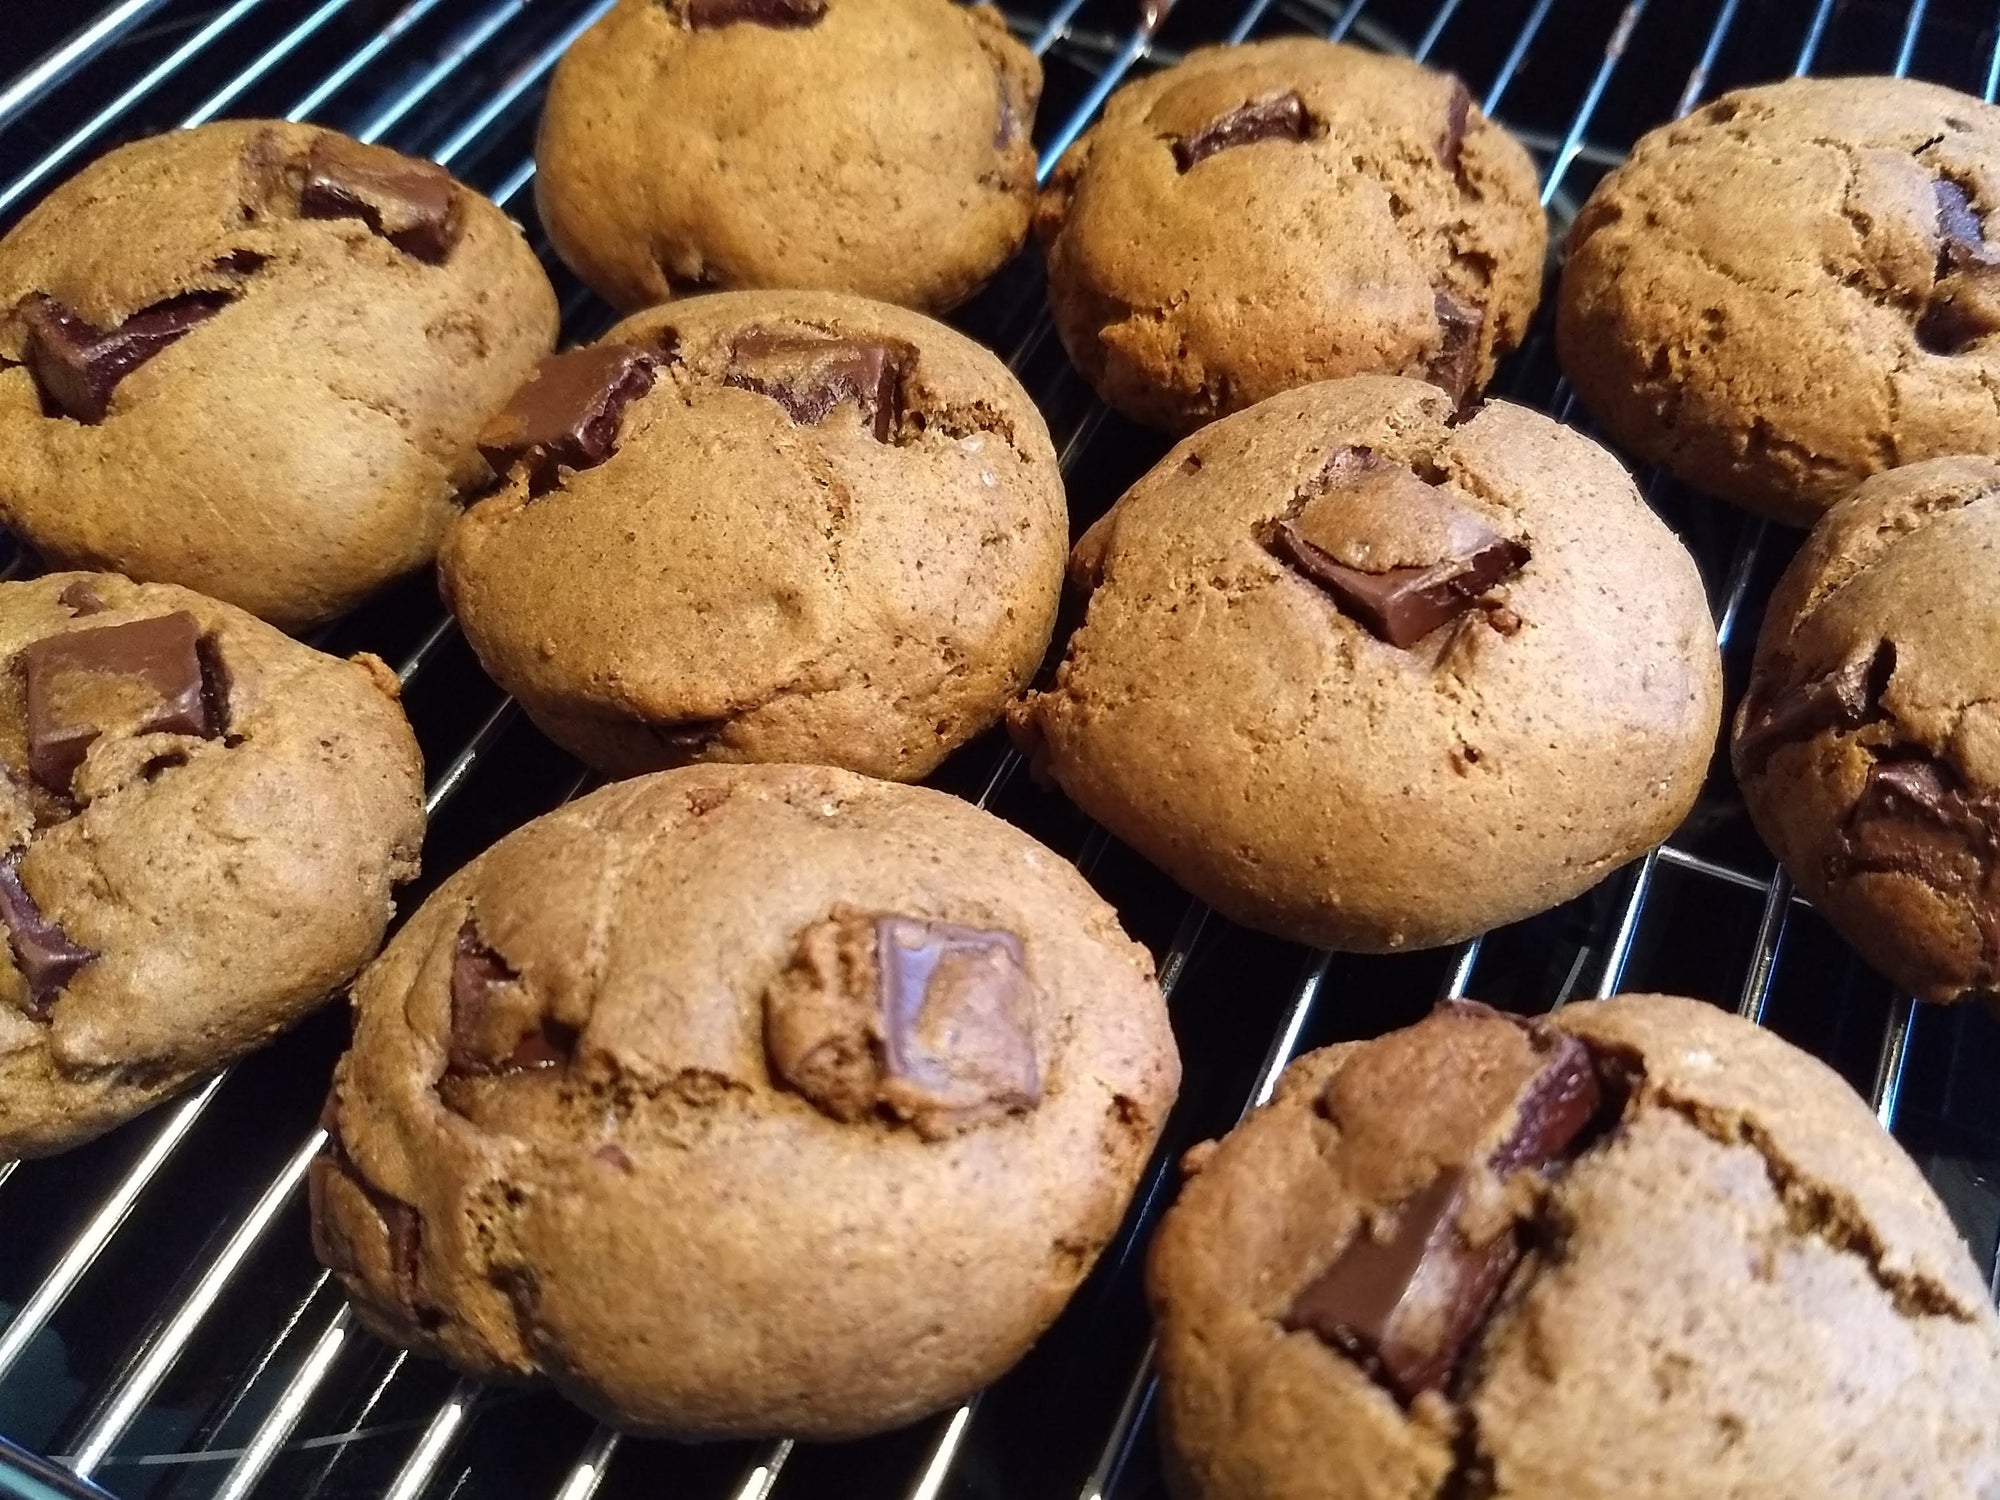 Healthy Chewy Chocolate Chip Cookies